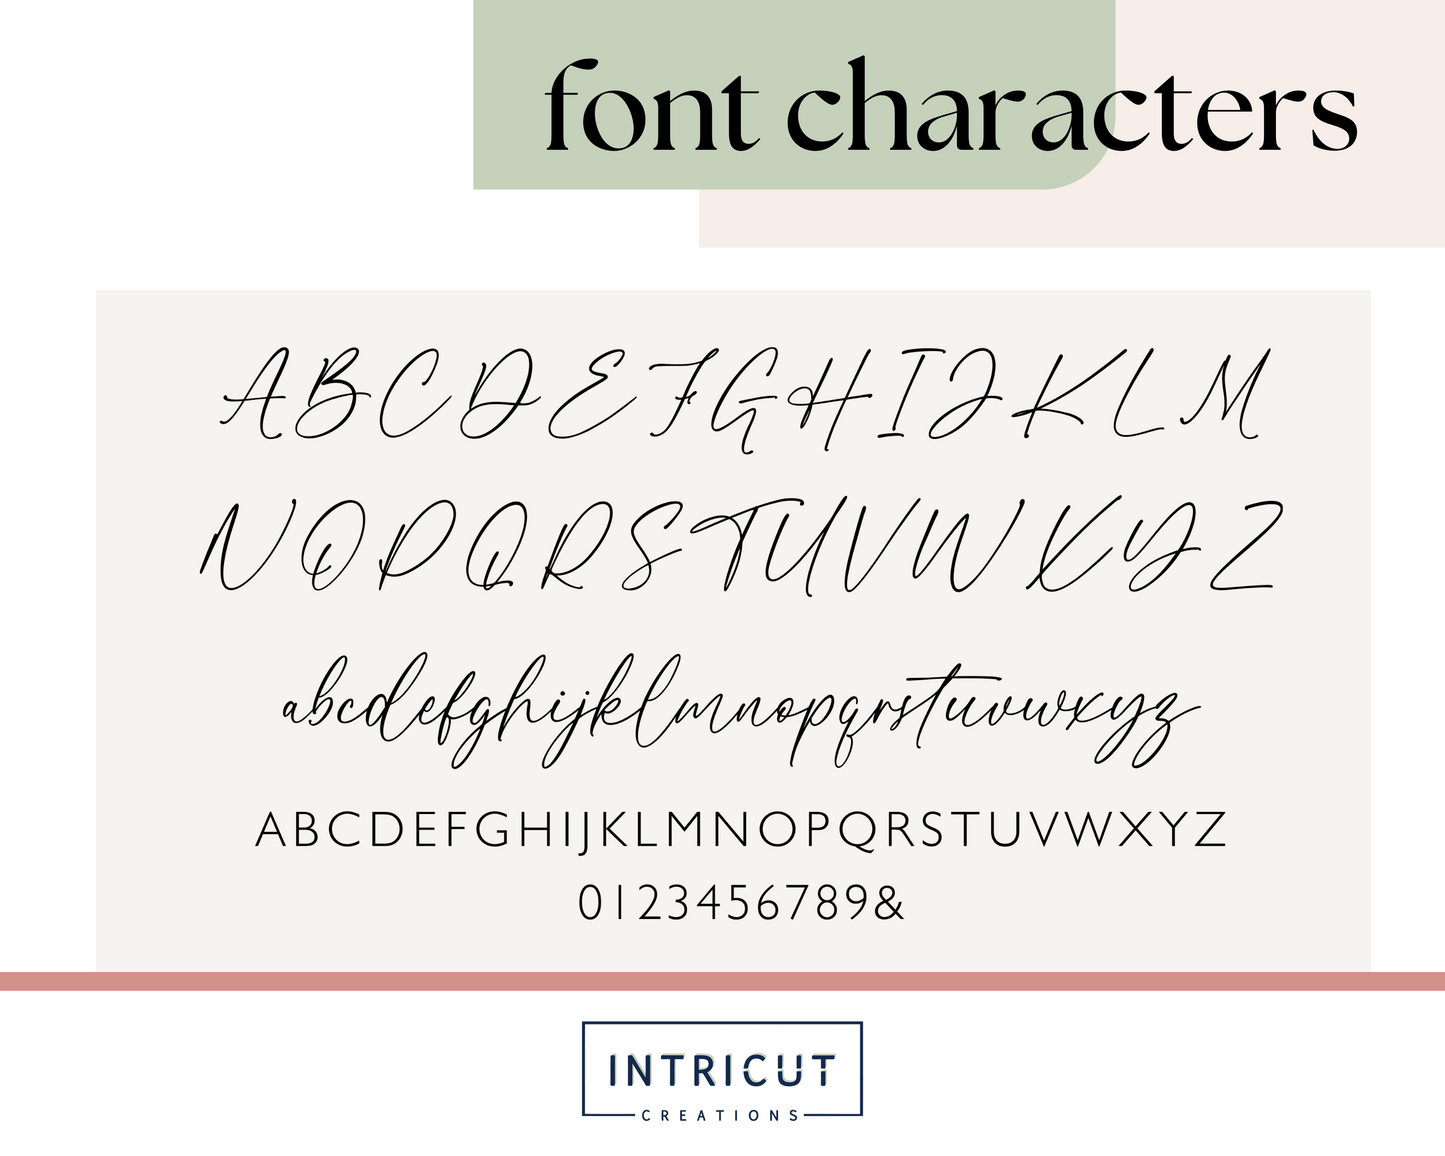 visual of each and every font character